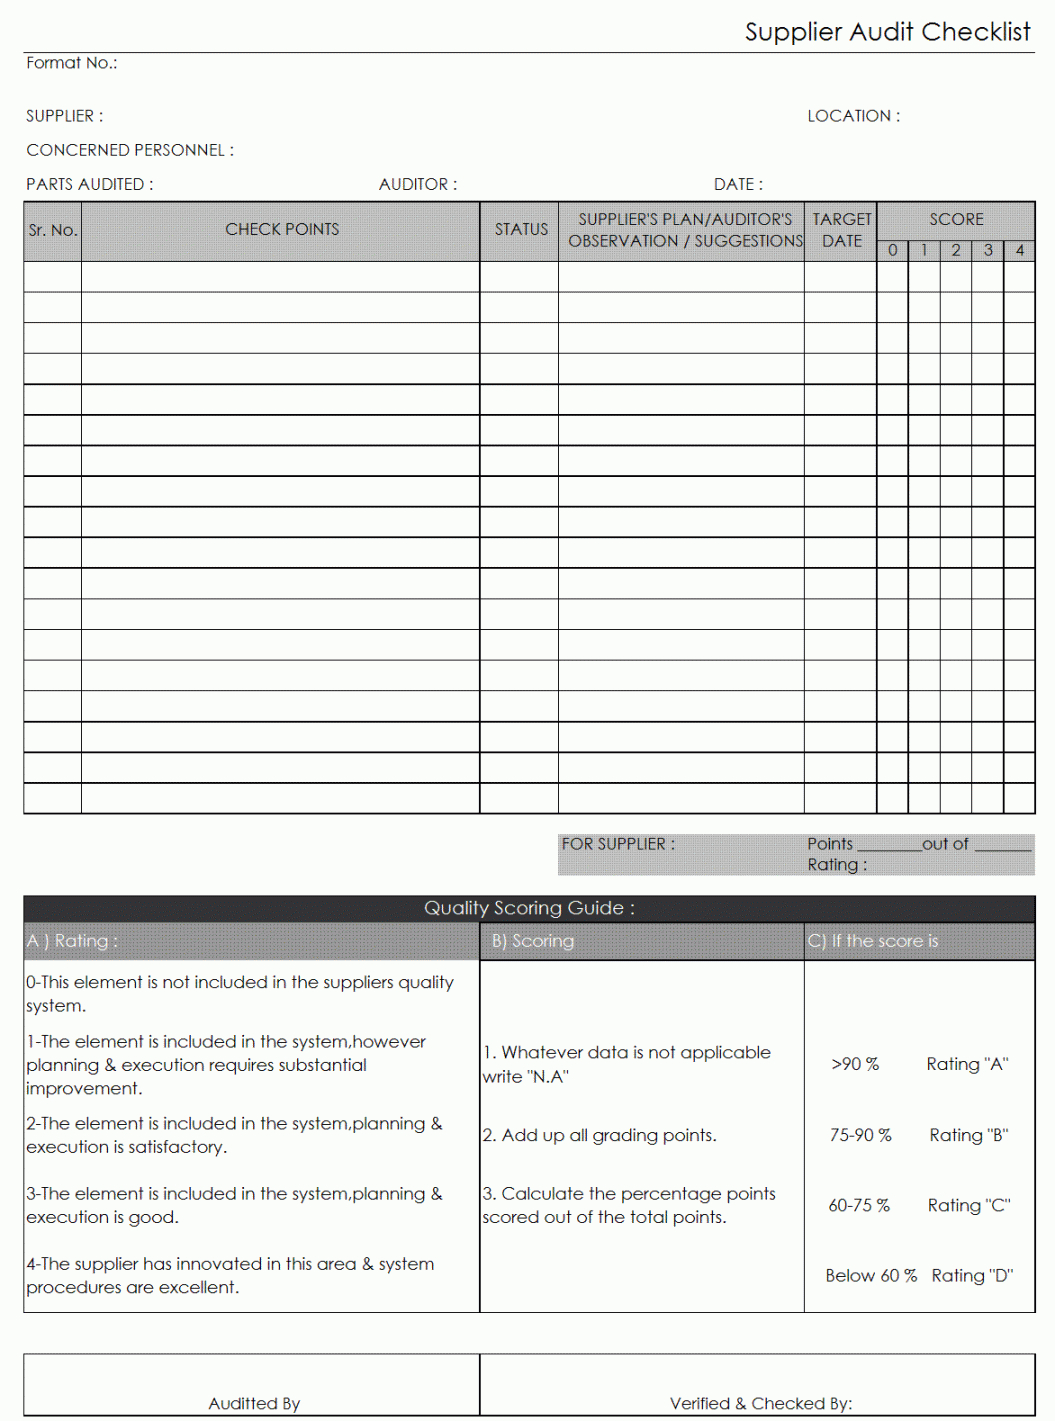 iso audit checklist supplier template samples excel xls for supplier audit checklist template doc